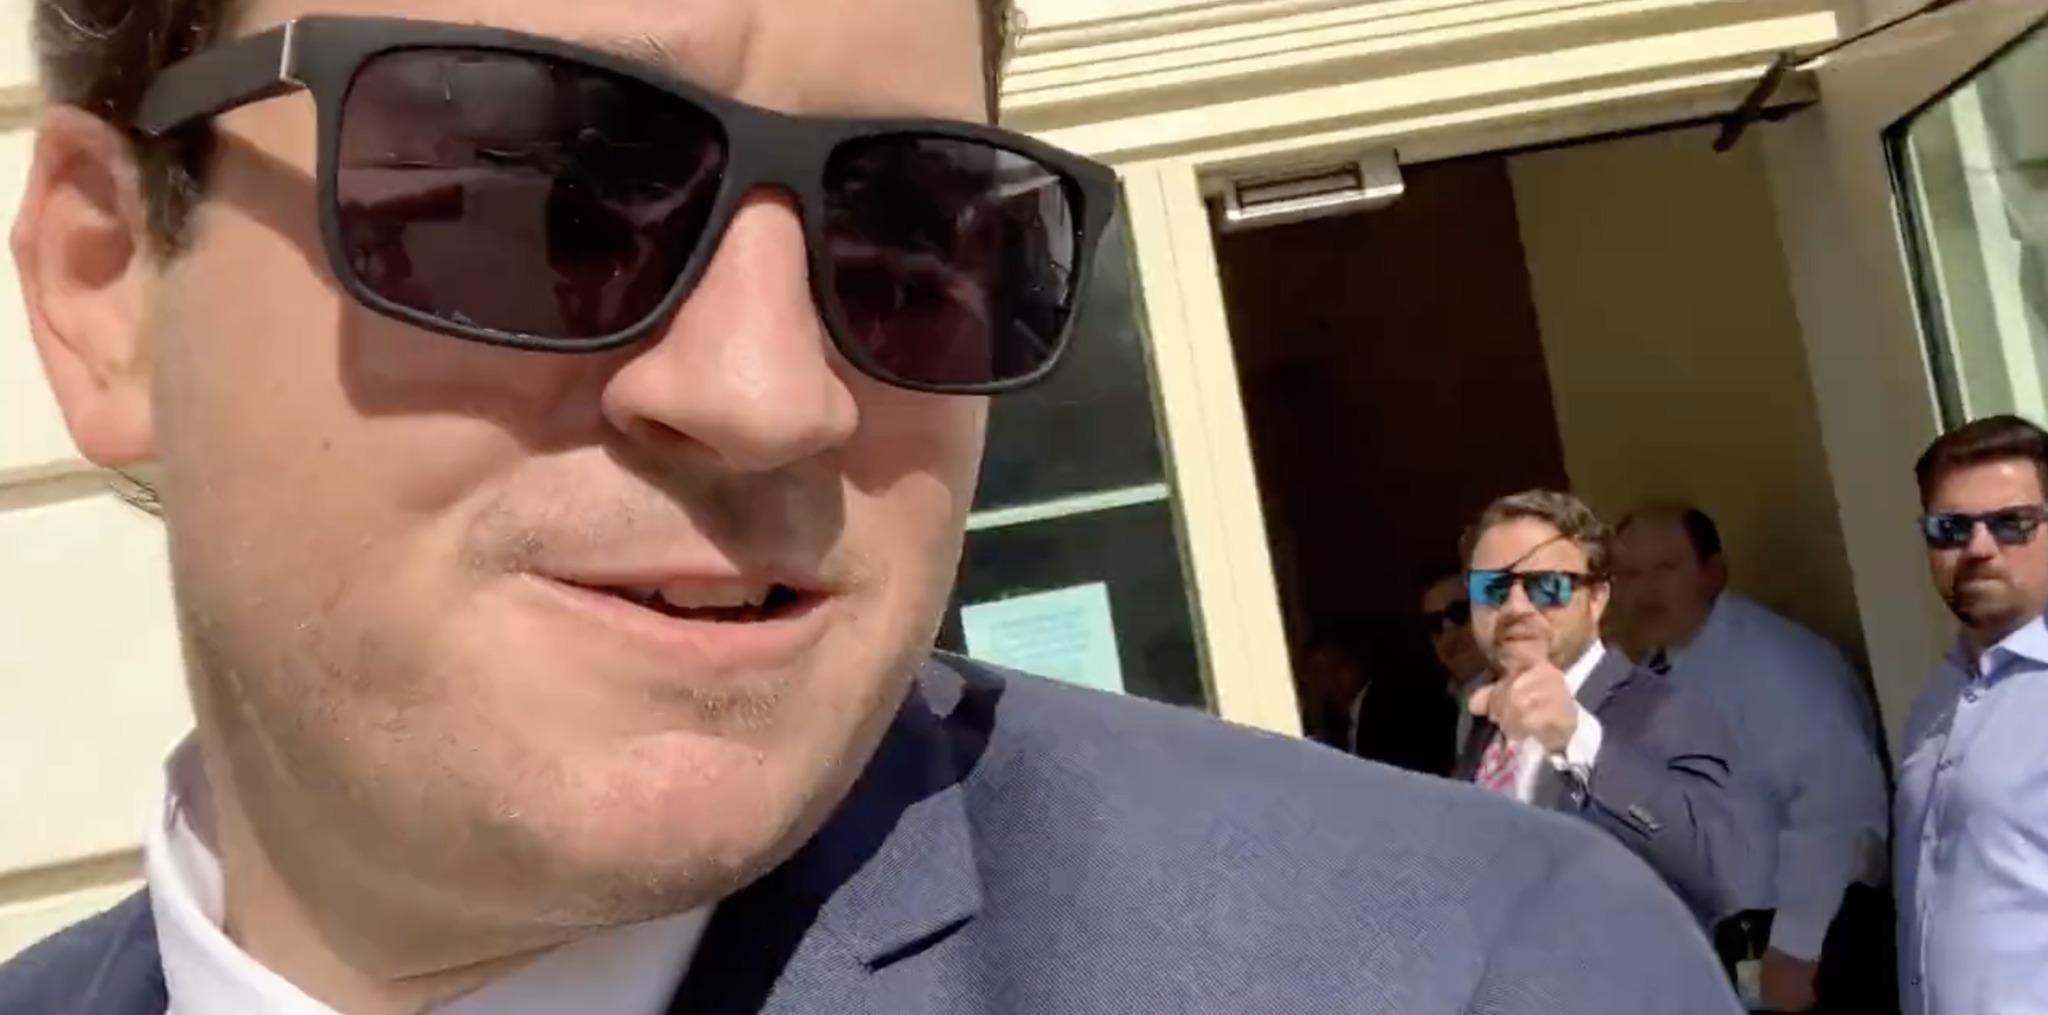 ‘You’re a Piece of Sh*t’: Dan Crenshaw Goes off on Right-Wing Troll Alex Stein in Heated Confrontation (mediaite.com)